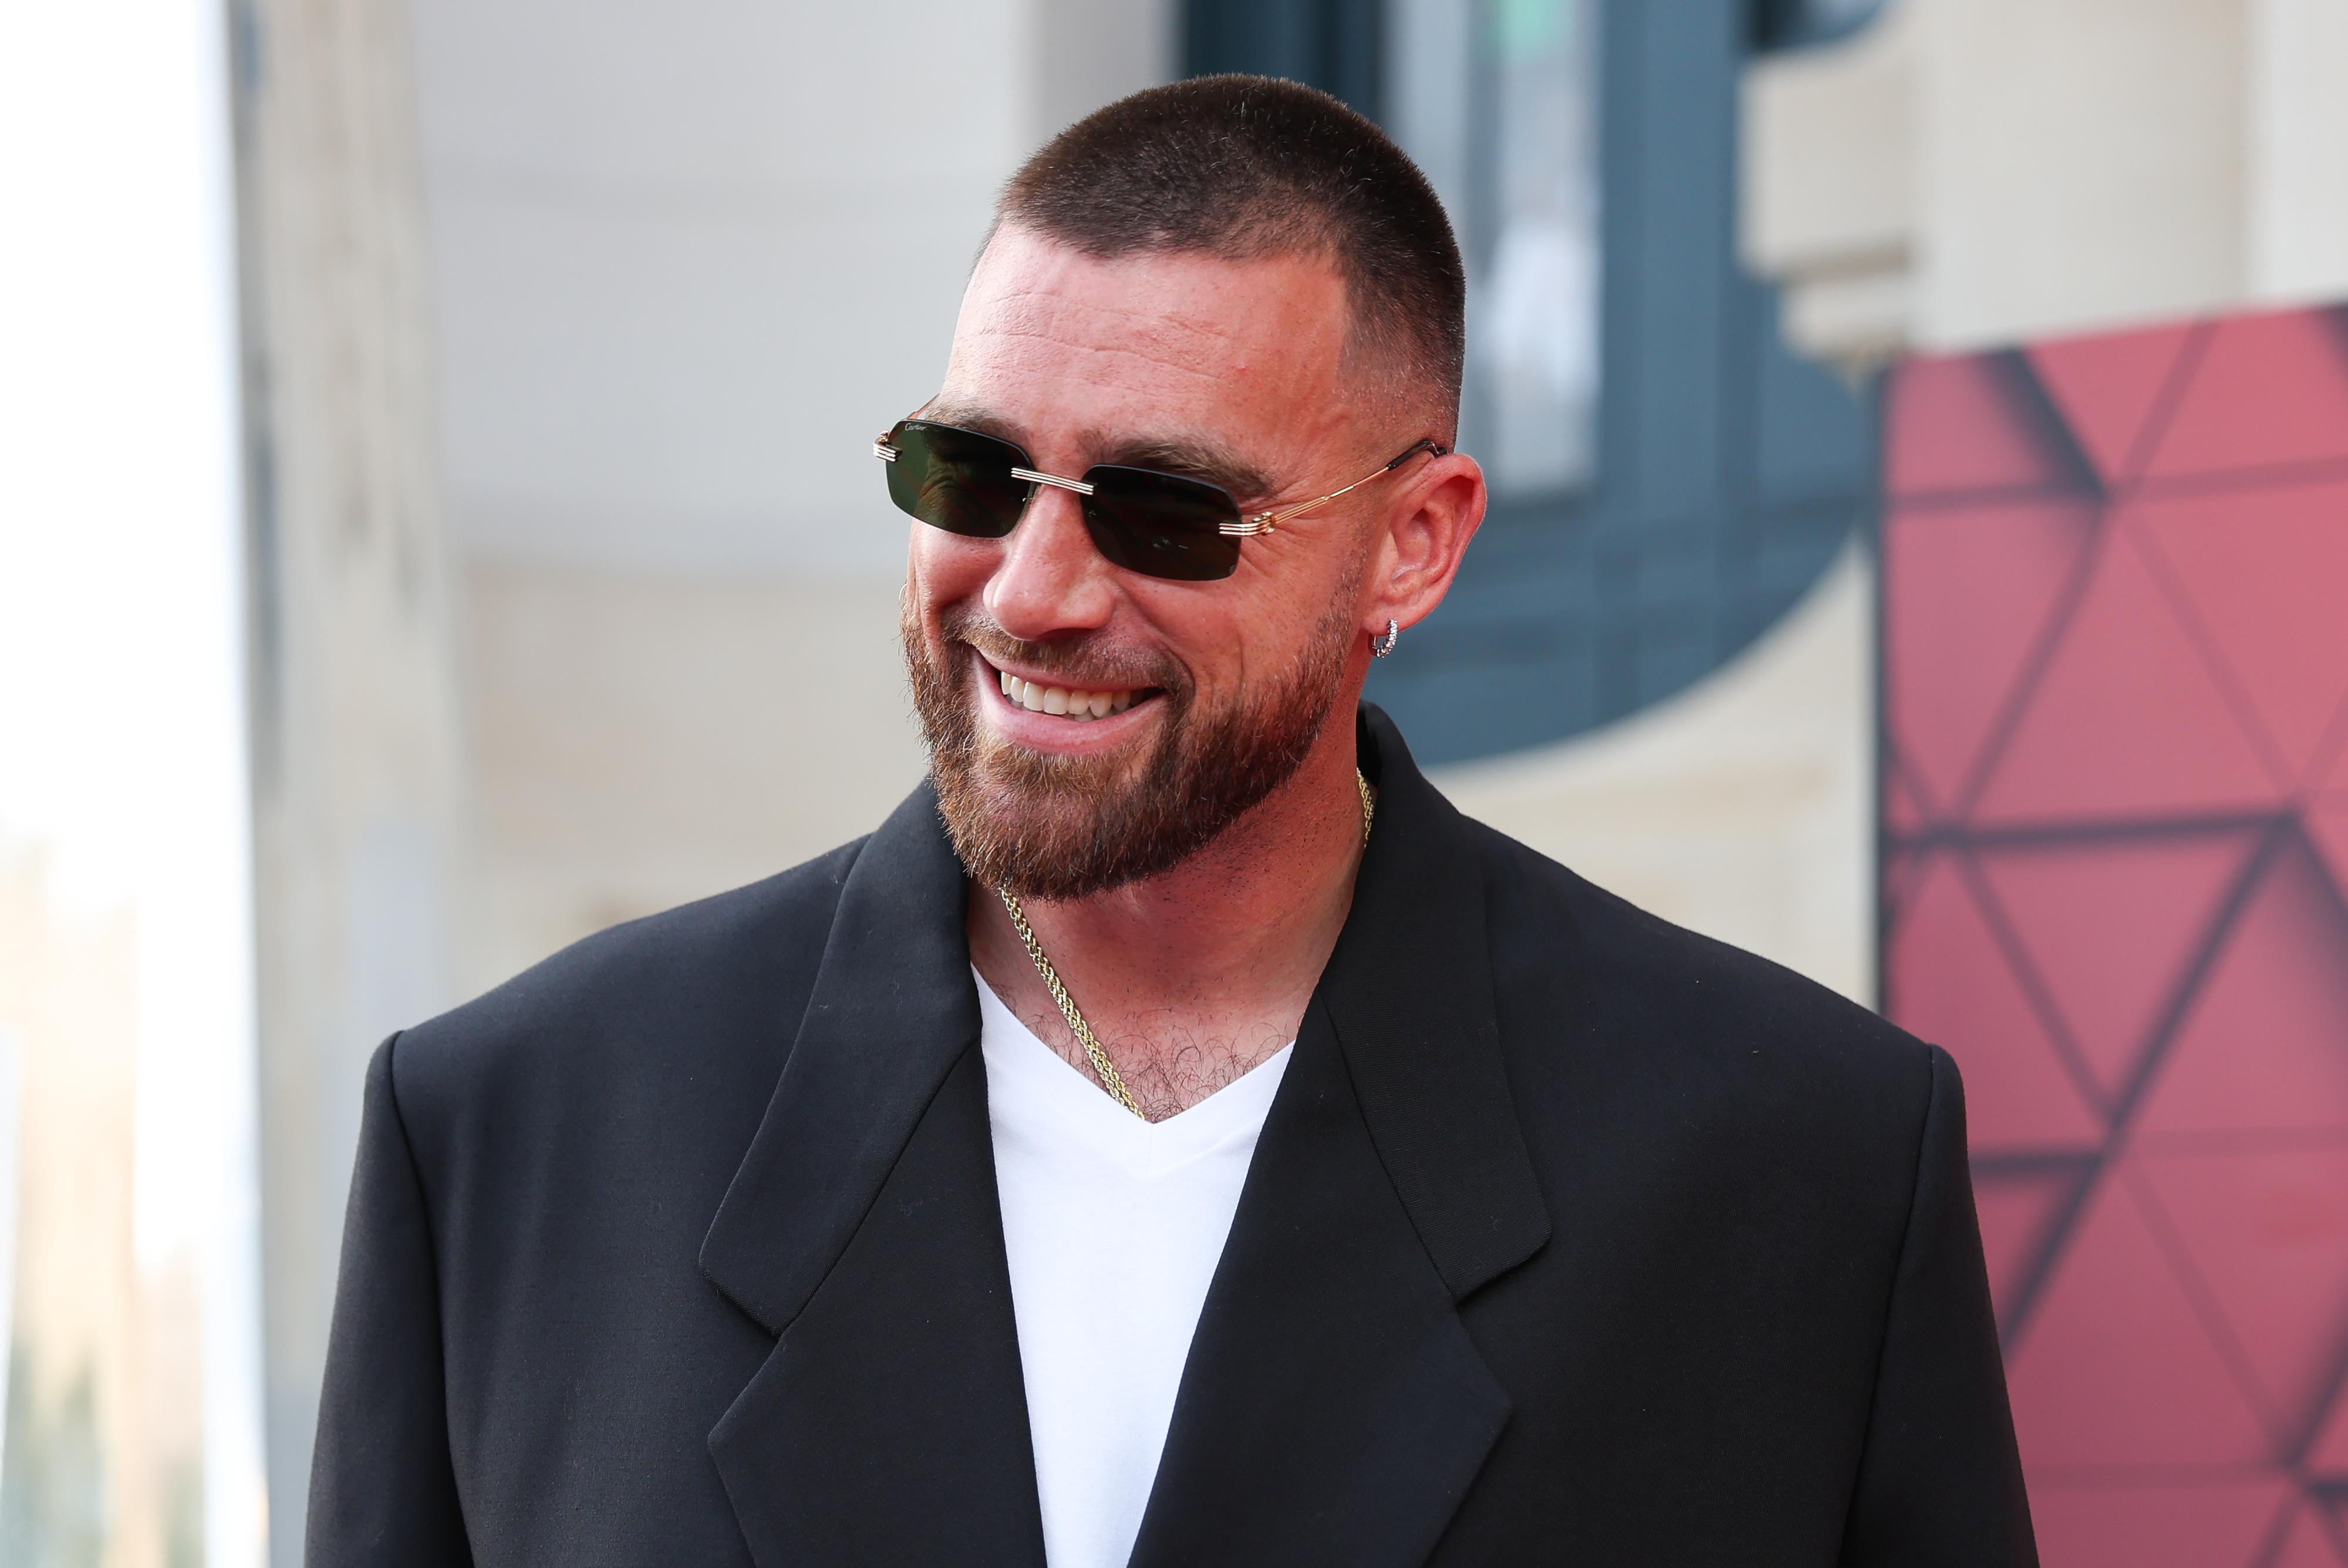 Close-up of Travis smiling and wearing sunglasses and a suit jacket